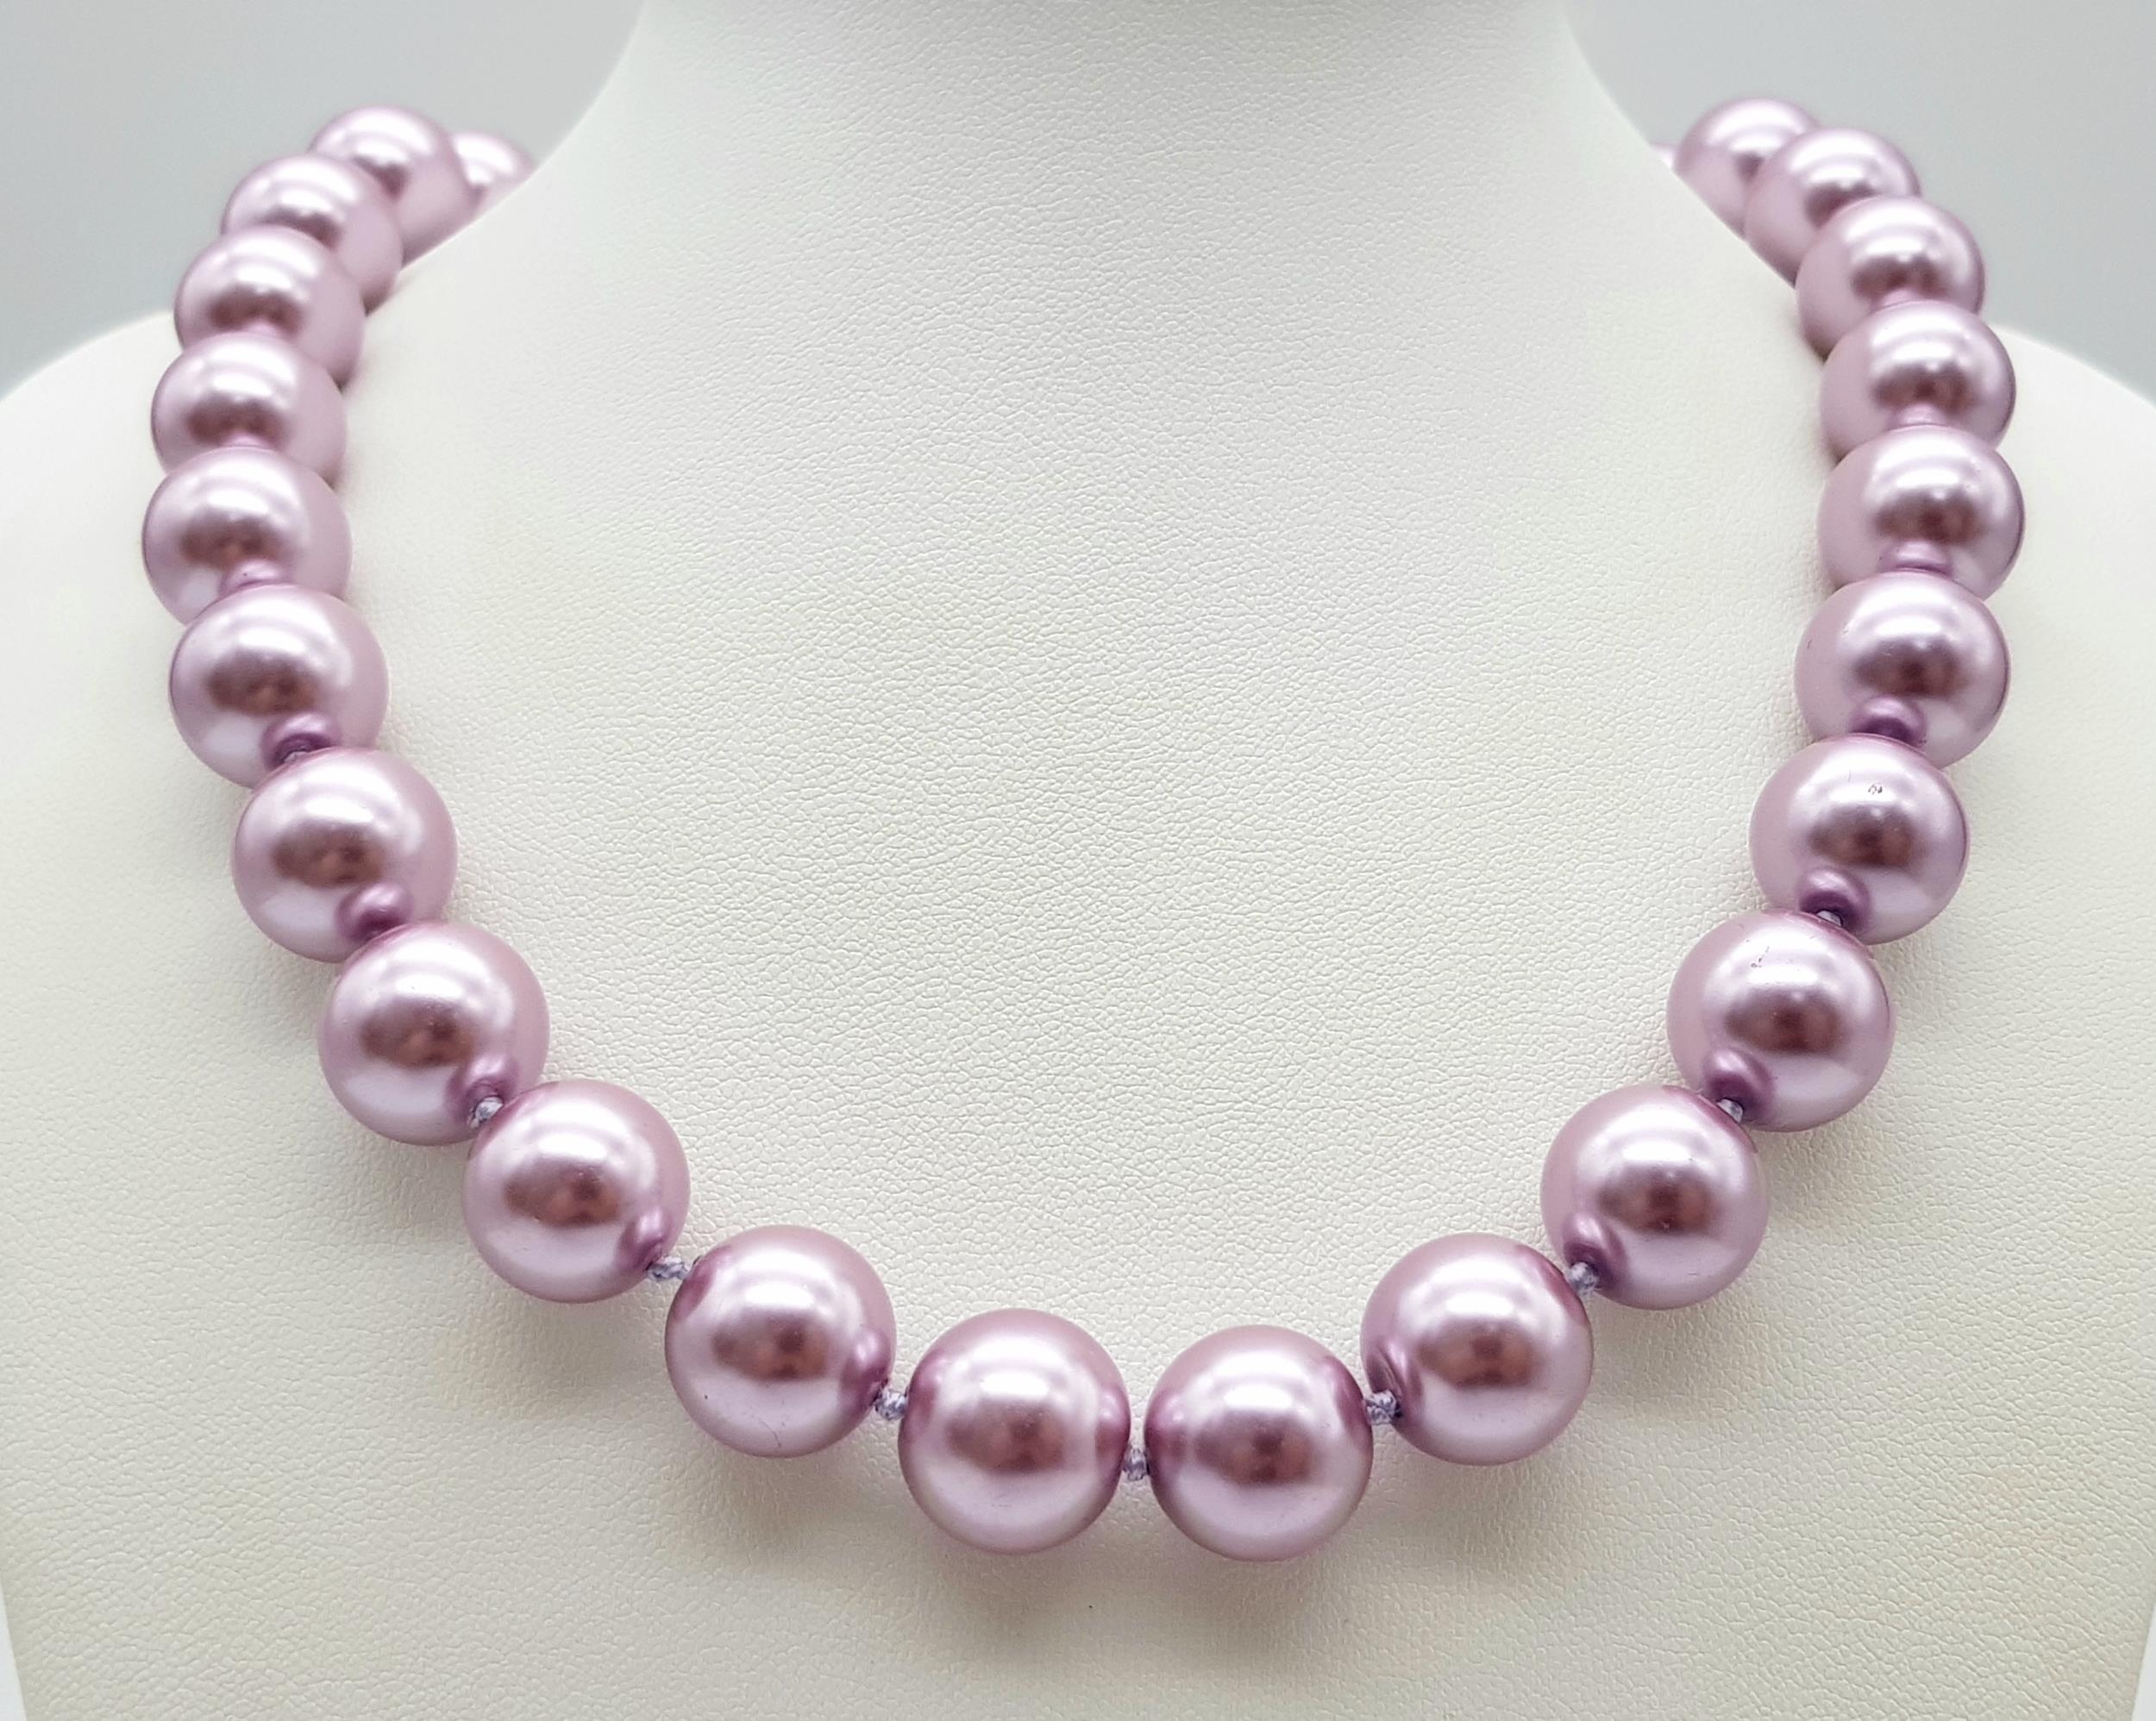 An Exotic Lavender South Sea Pearl Shell Beaded Necklace. 14mm beads. 44cm necklace length